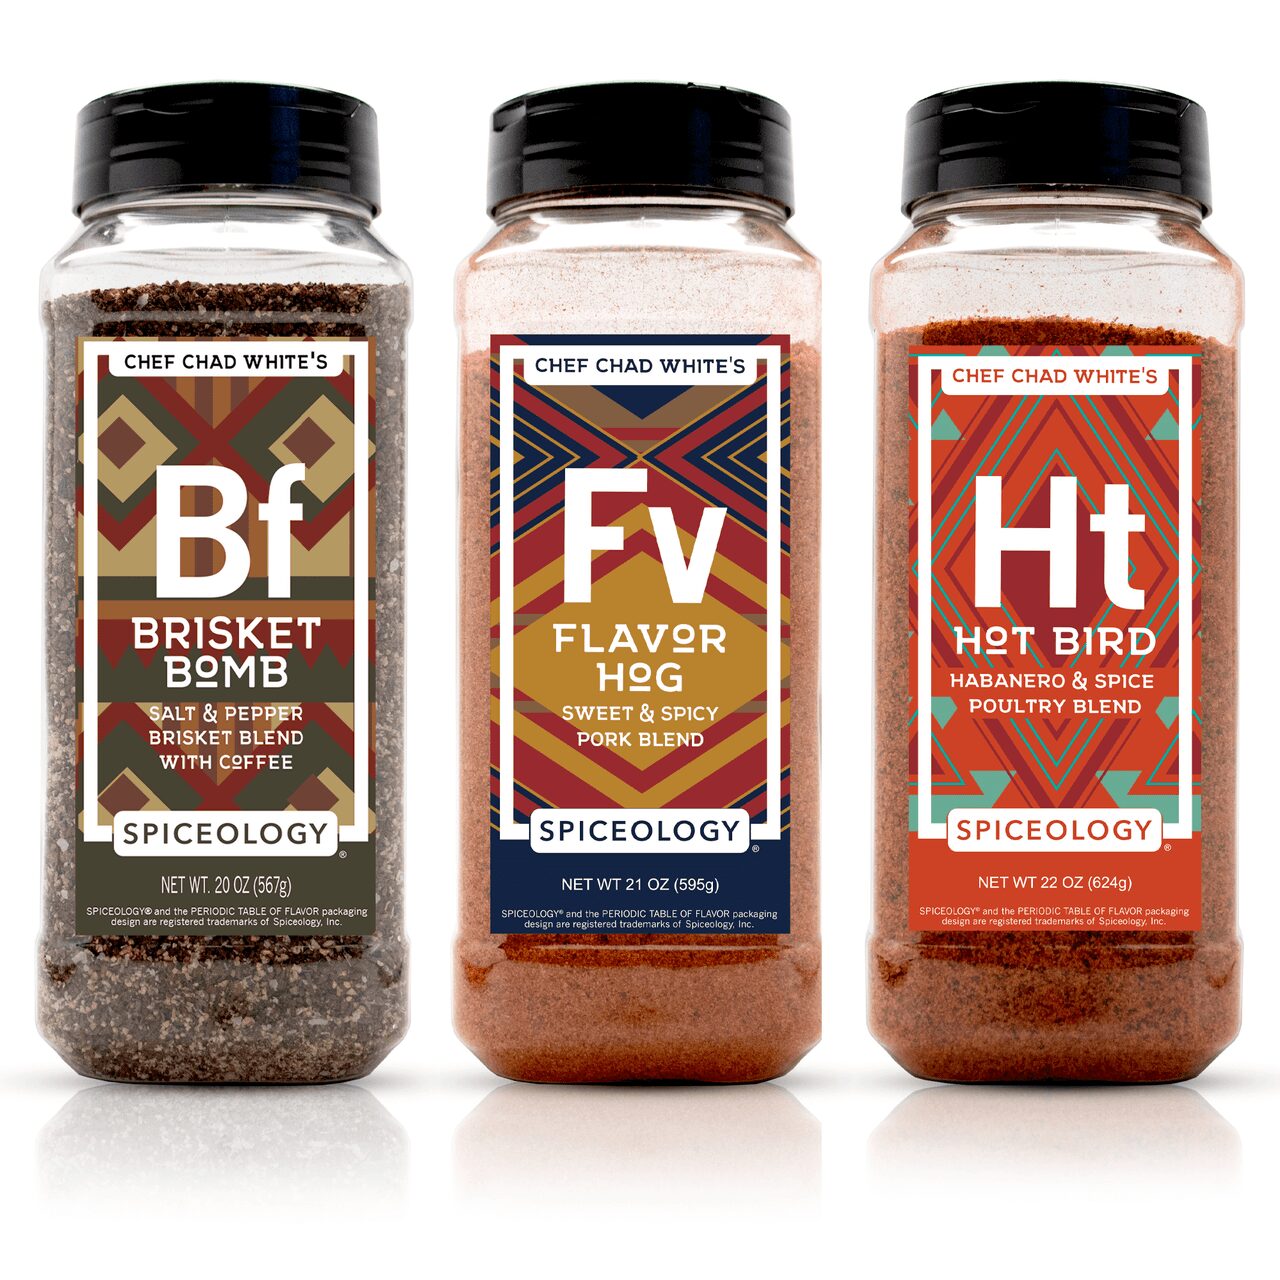 Enter the Spiceology X HexClad Giveaway for Chefs and Home Cooks